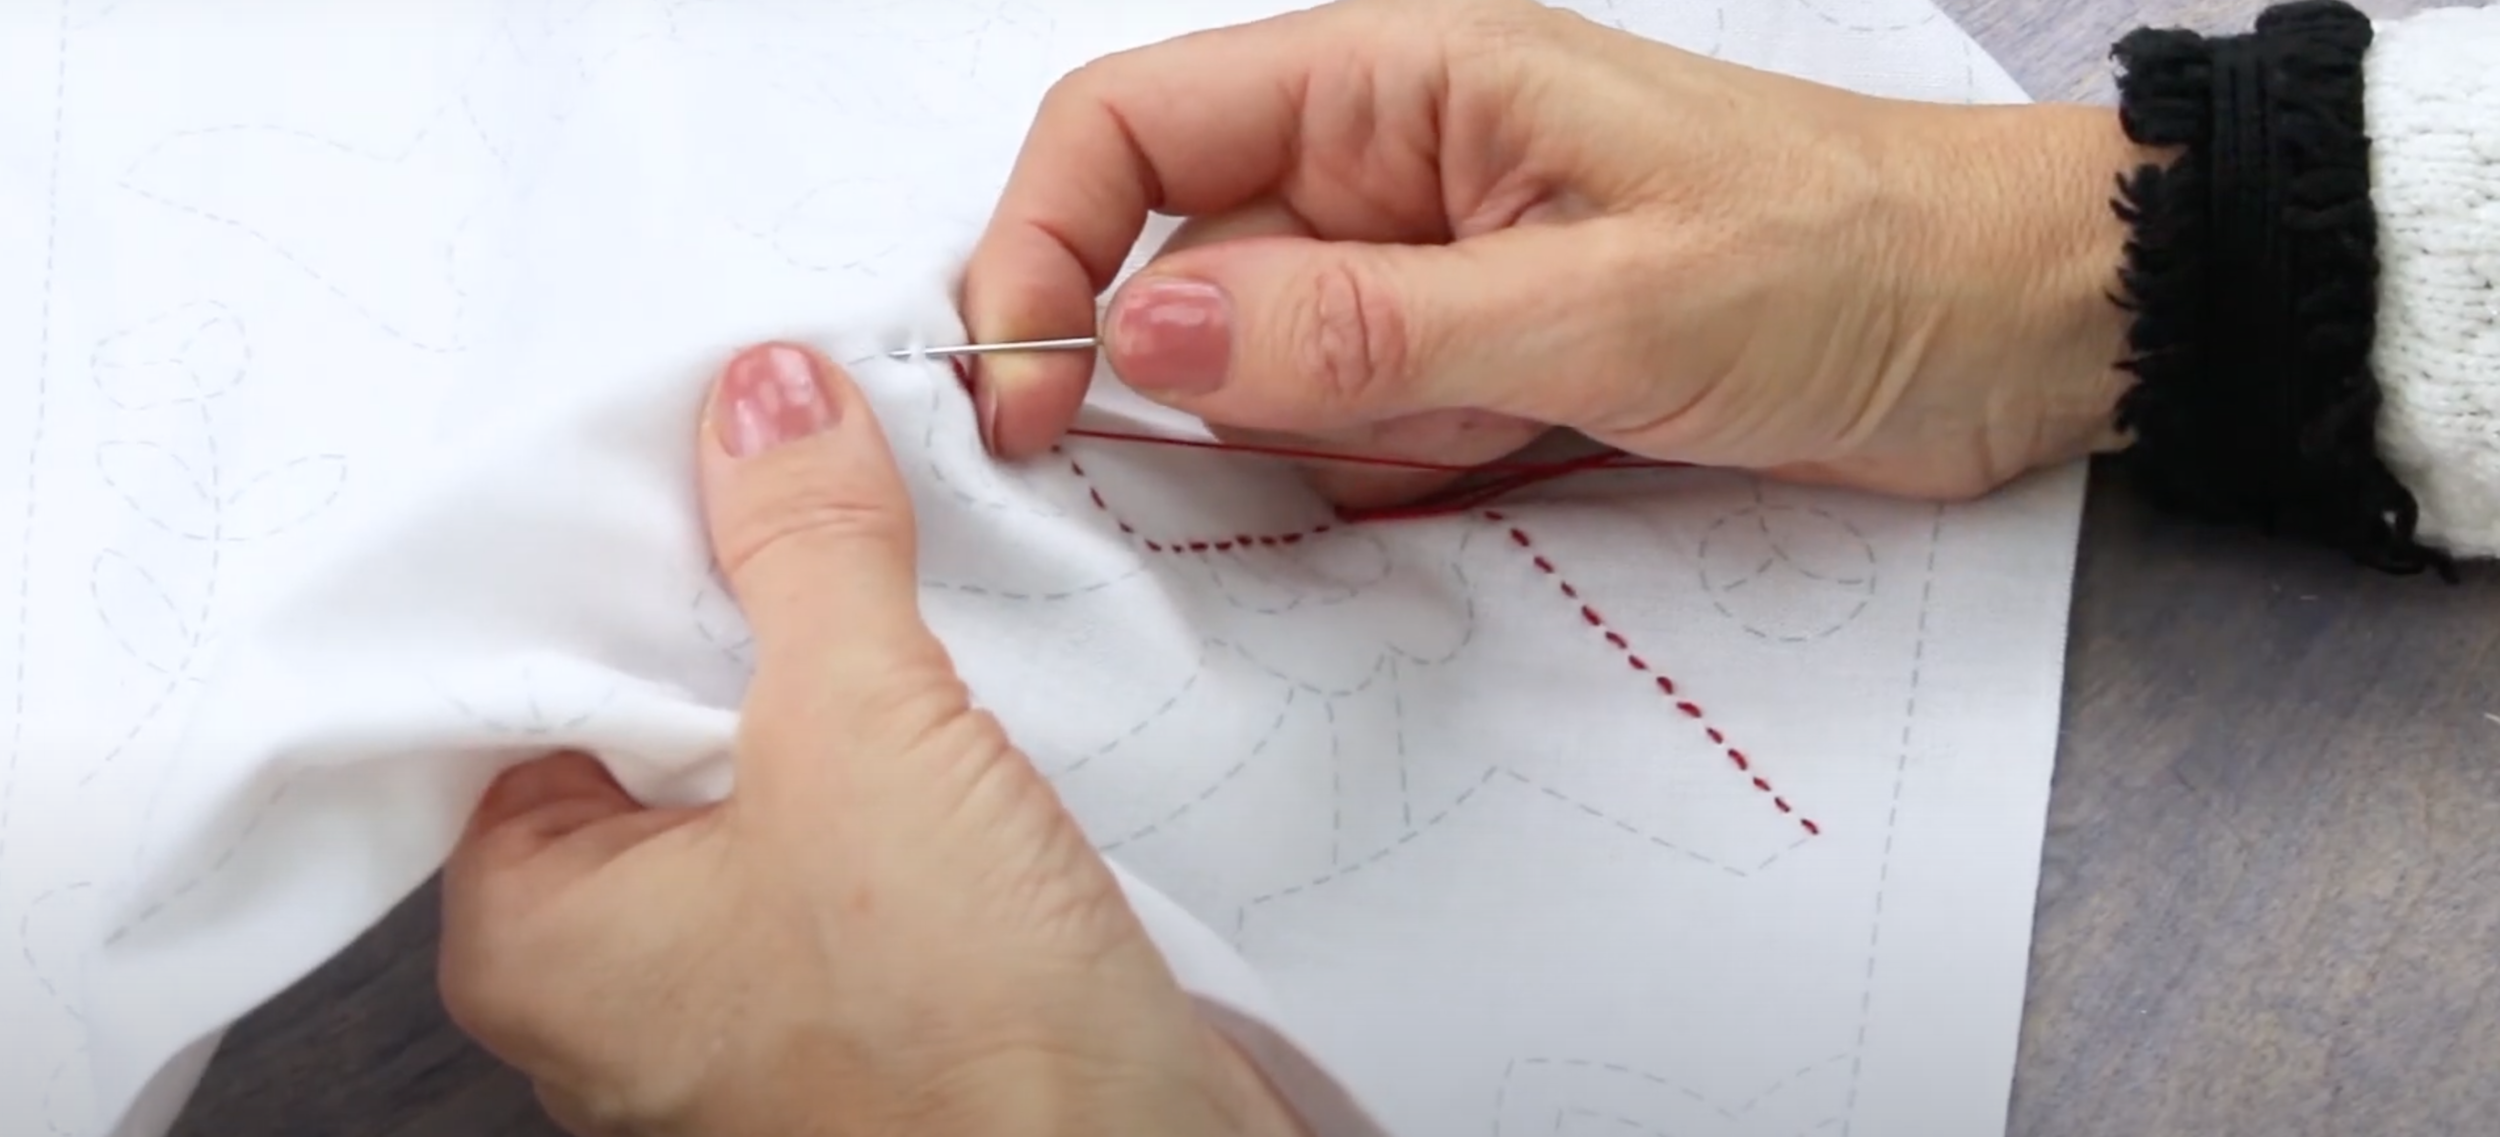 WonderFil Specialty Threads - Sashiko Embroidery by Hand Using 